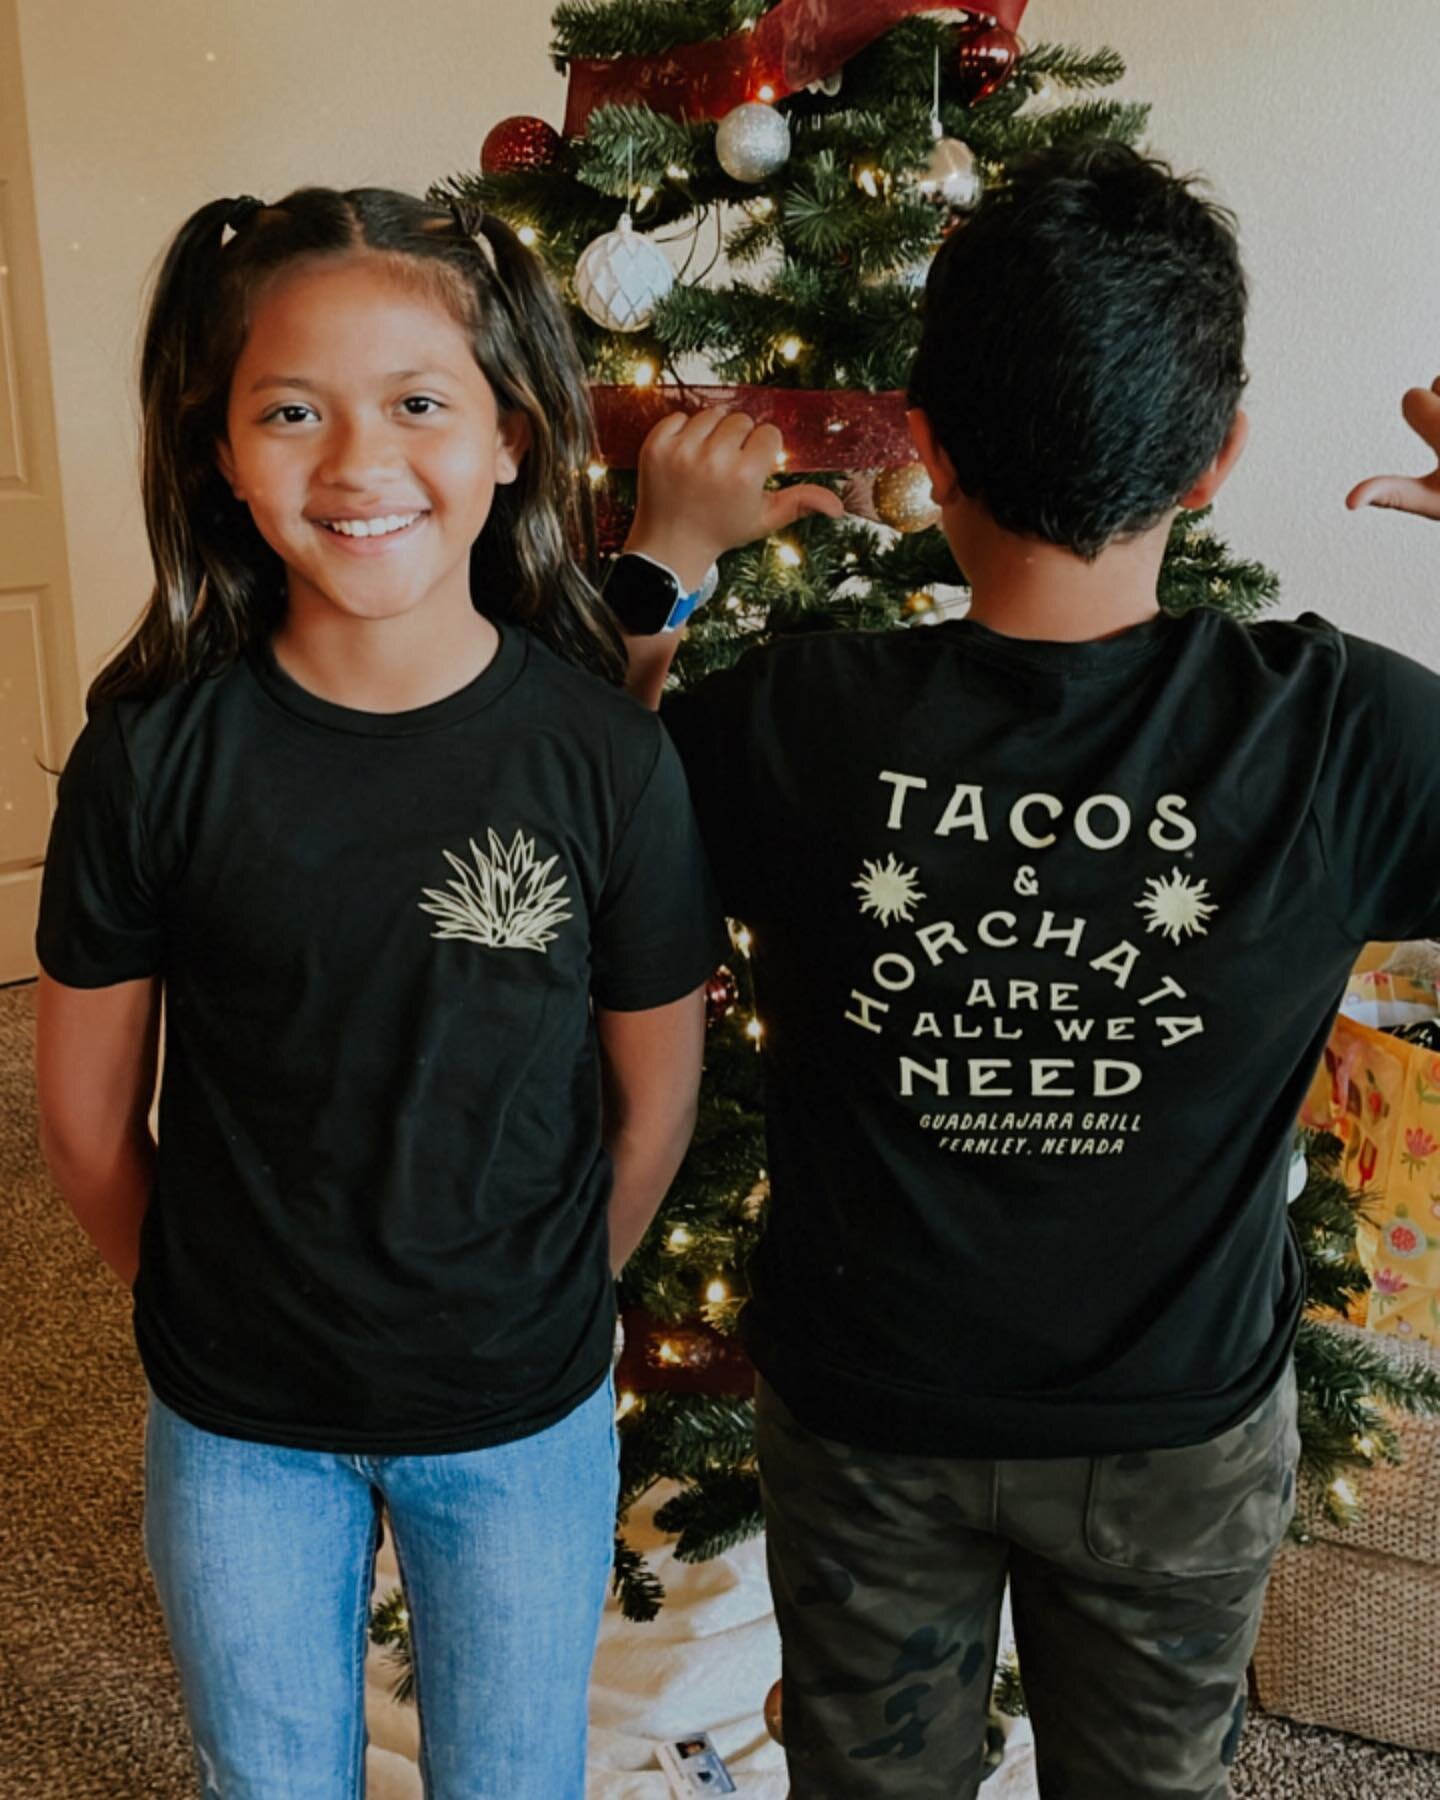 Now selling youth sized shirts for your taco loving ni&ntilde;os! 🌵